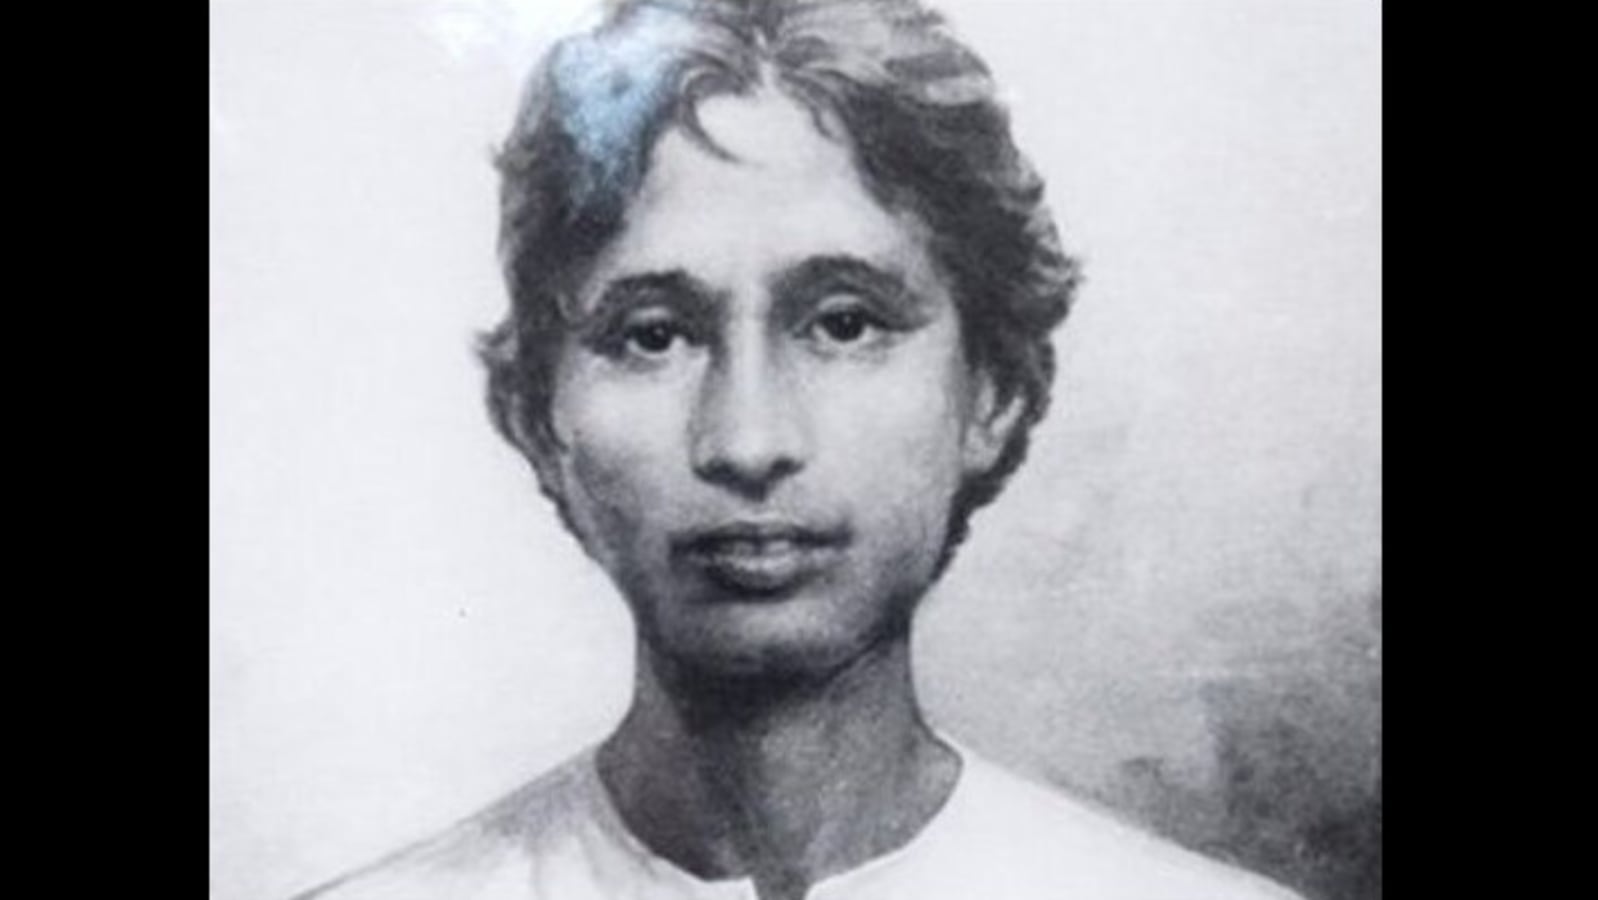 Read all Latest Updates on and about Khudiram Bose